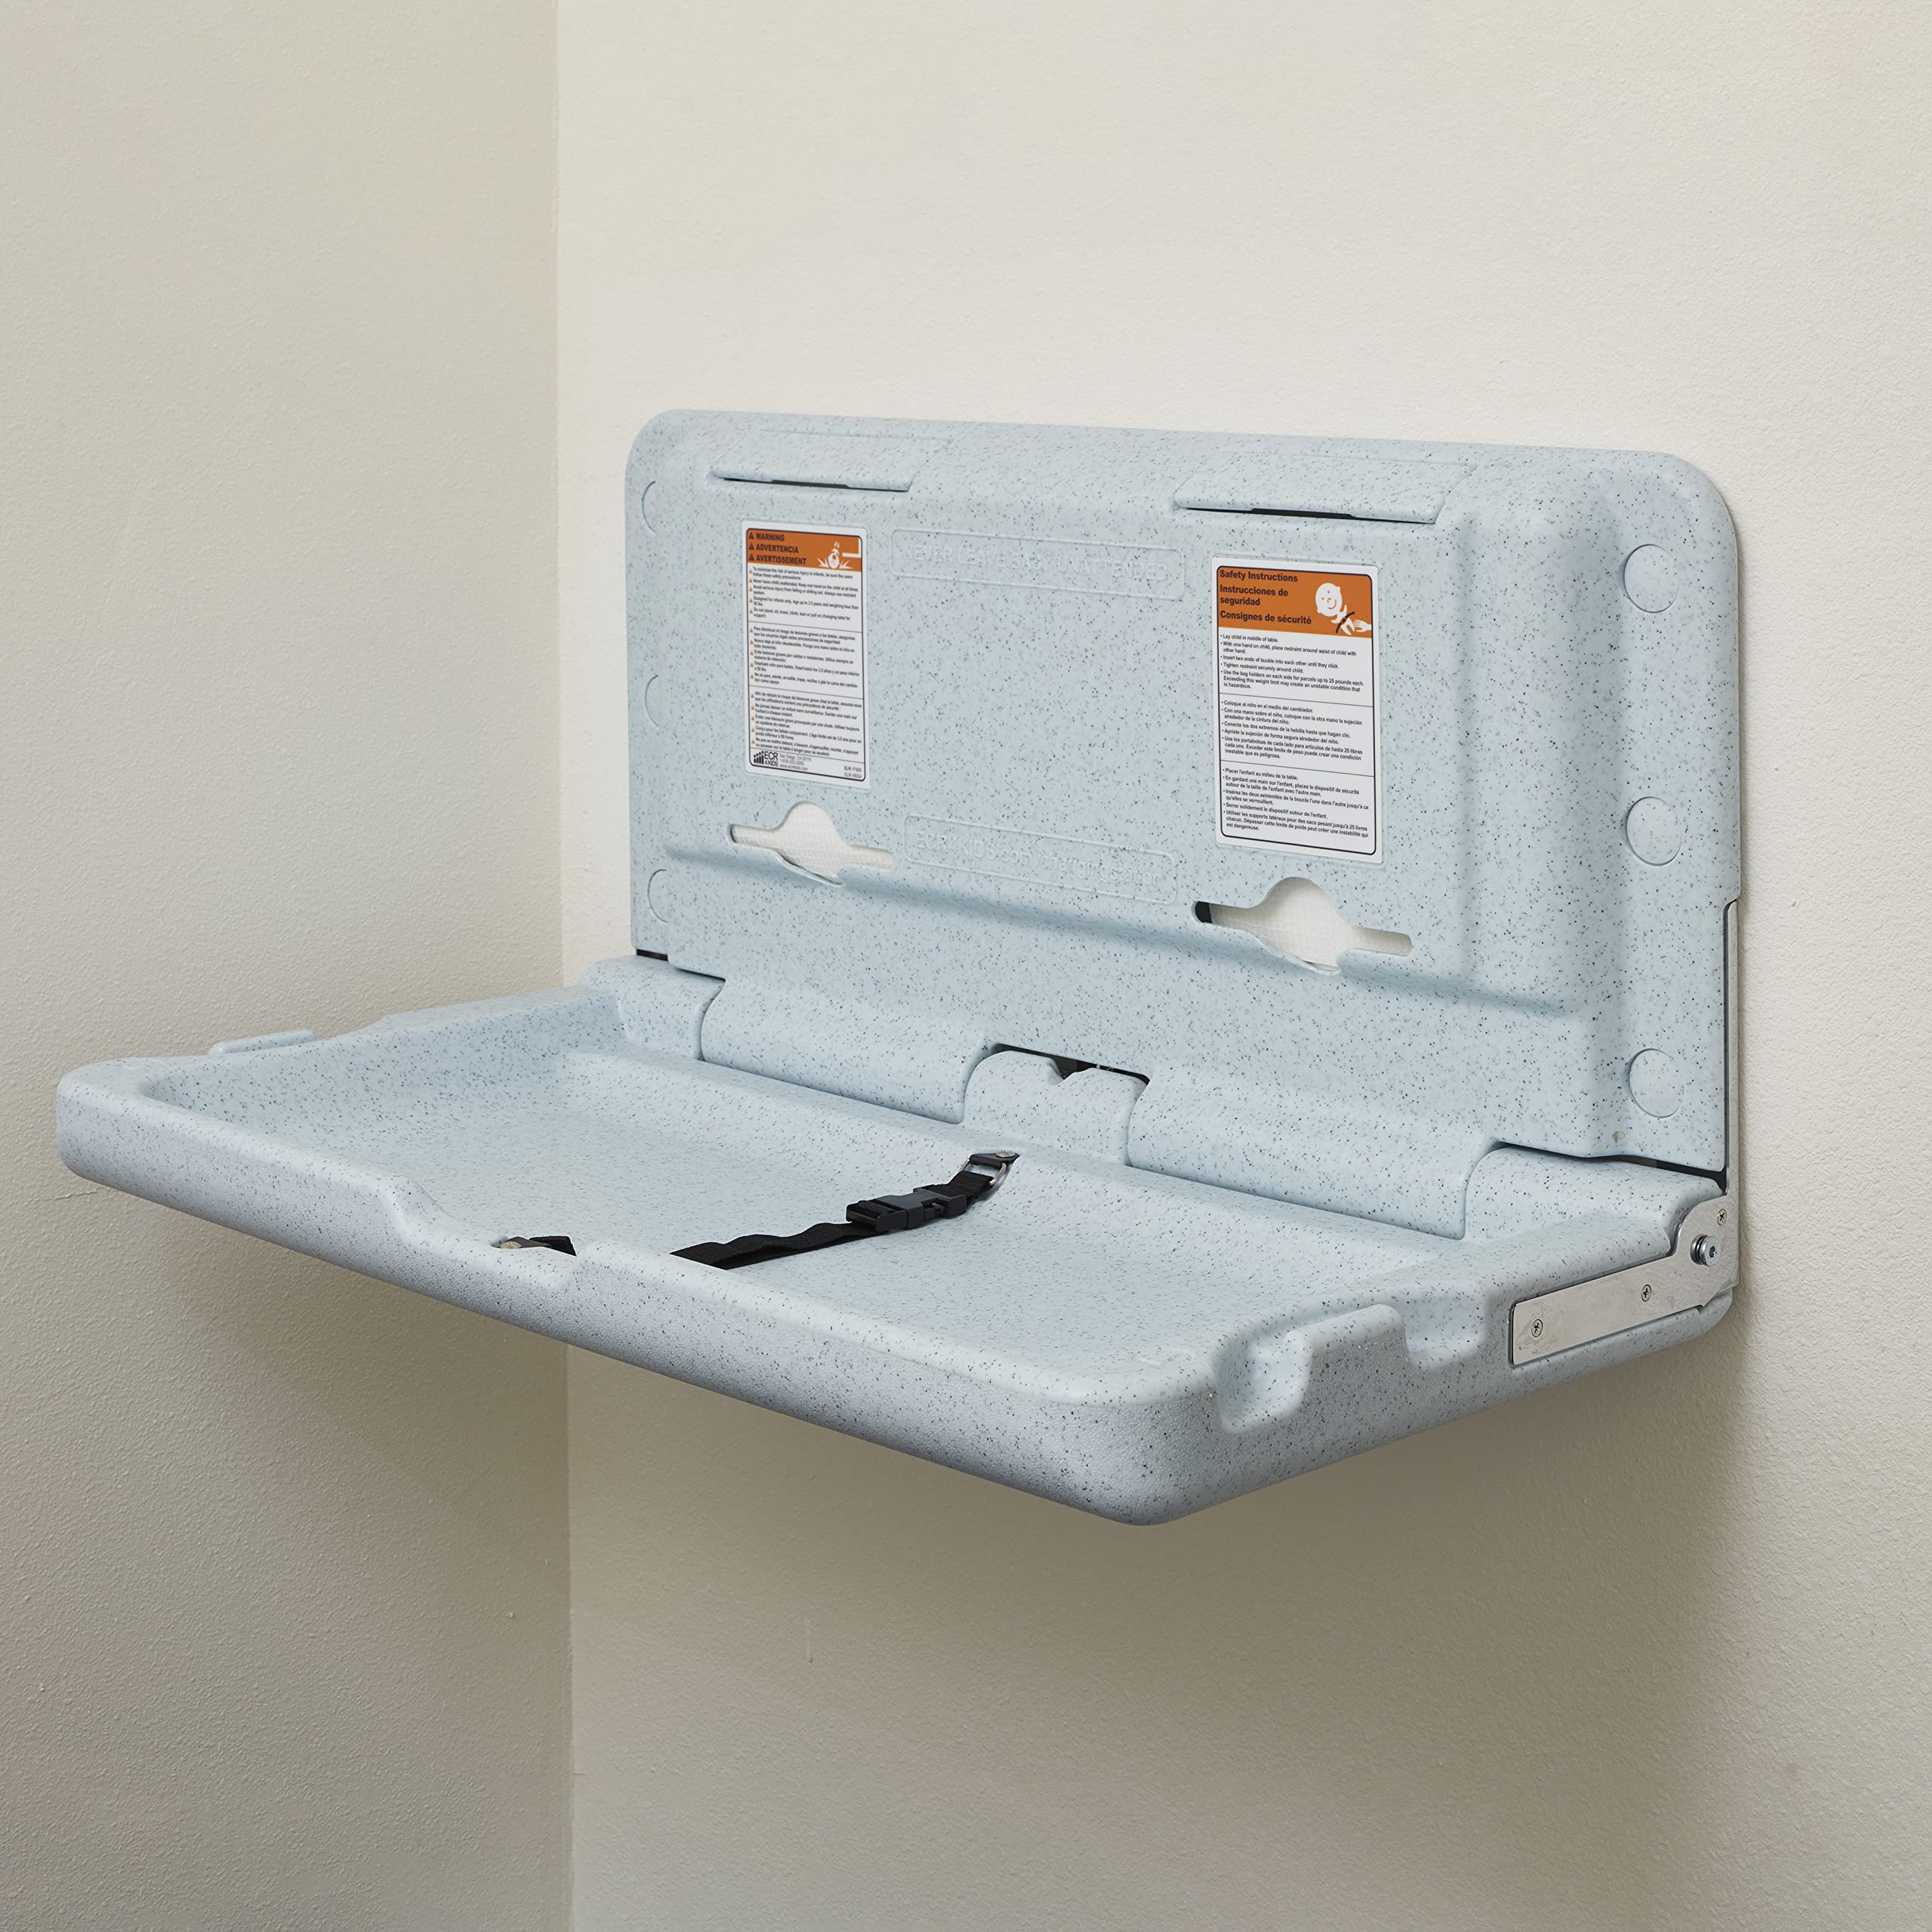 ECR4Kids Horizontal Wall-Mounted Baby Changing Station, Wall-Mounted, Blue/Grey Speckled